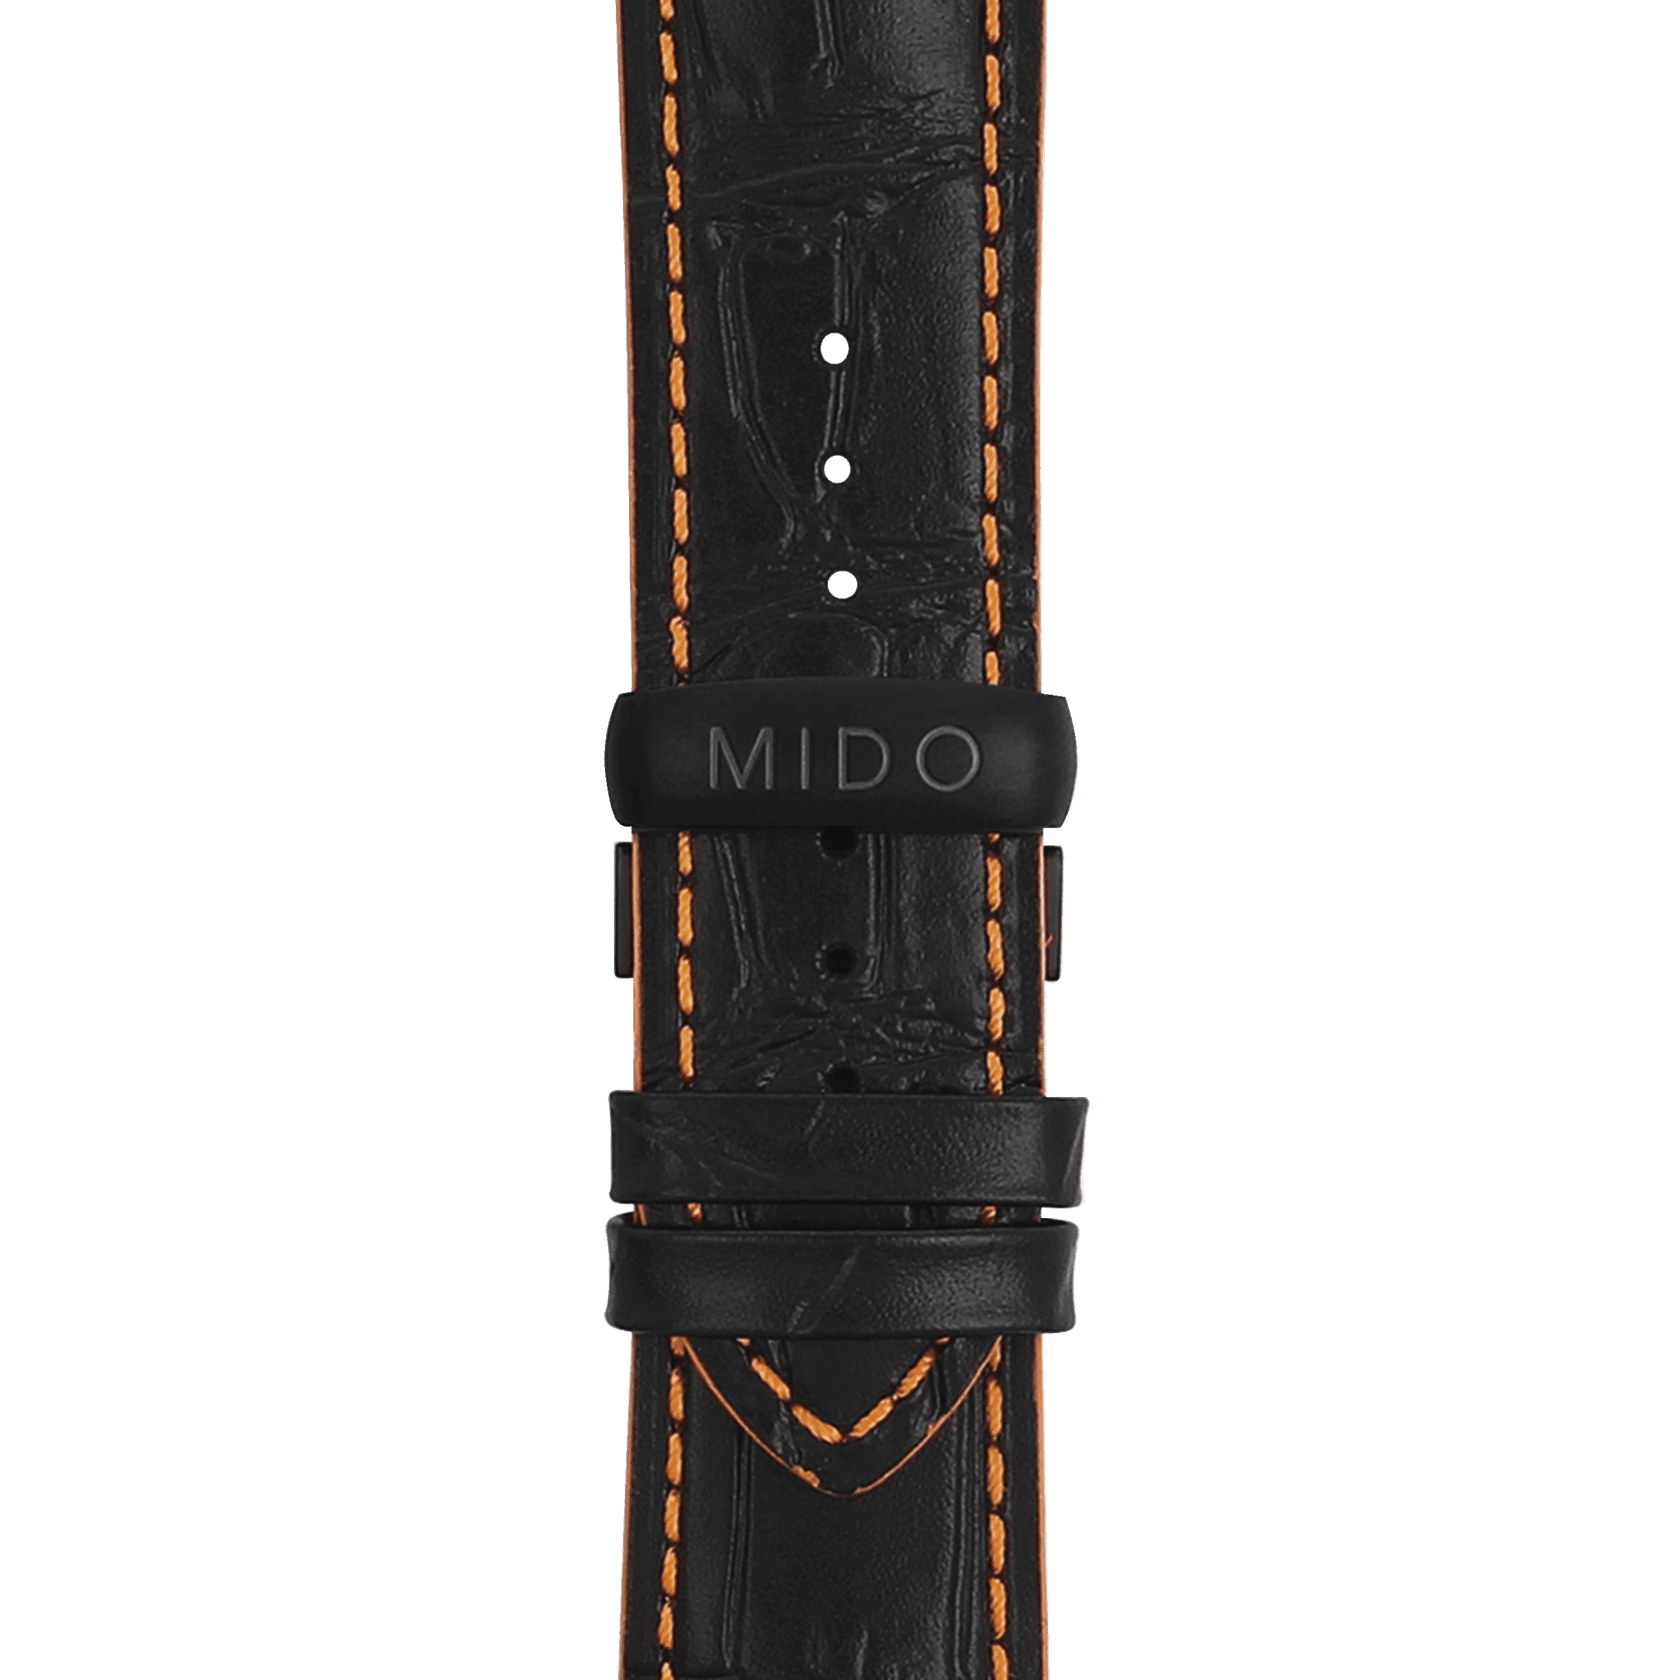 Multifort Chronograph Special Edition